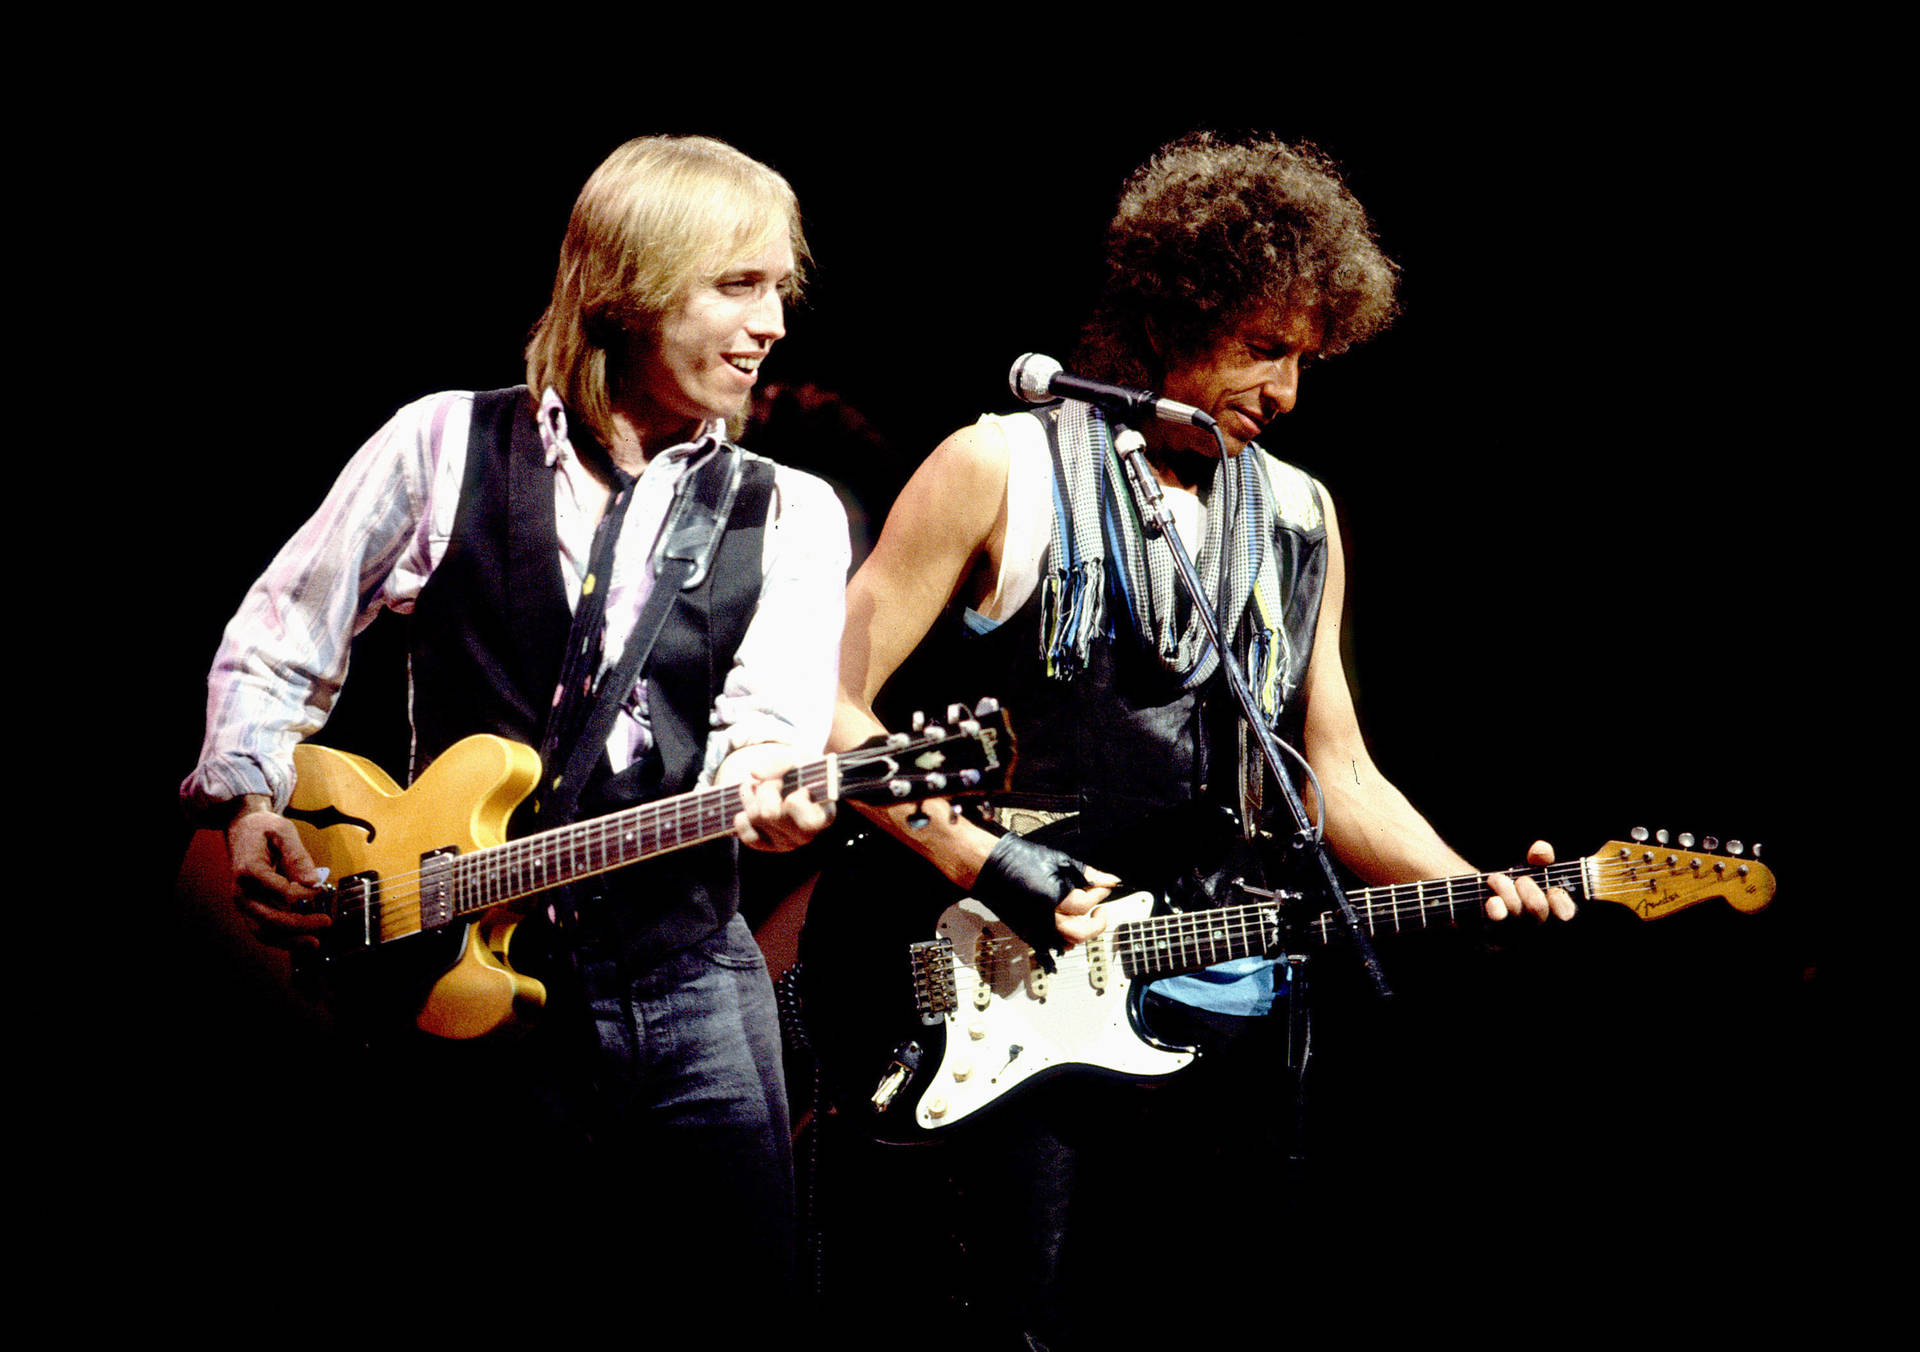 American Rock Band Tom Petty And The Heartbreakers 1986 Performance Wallpaper